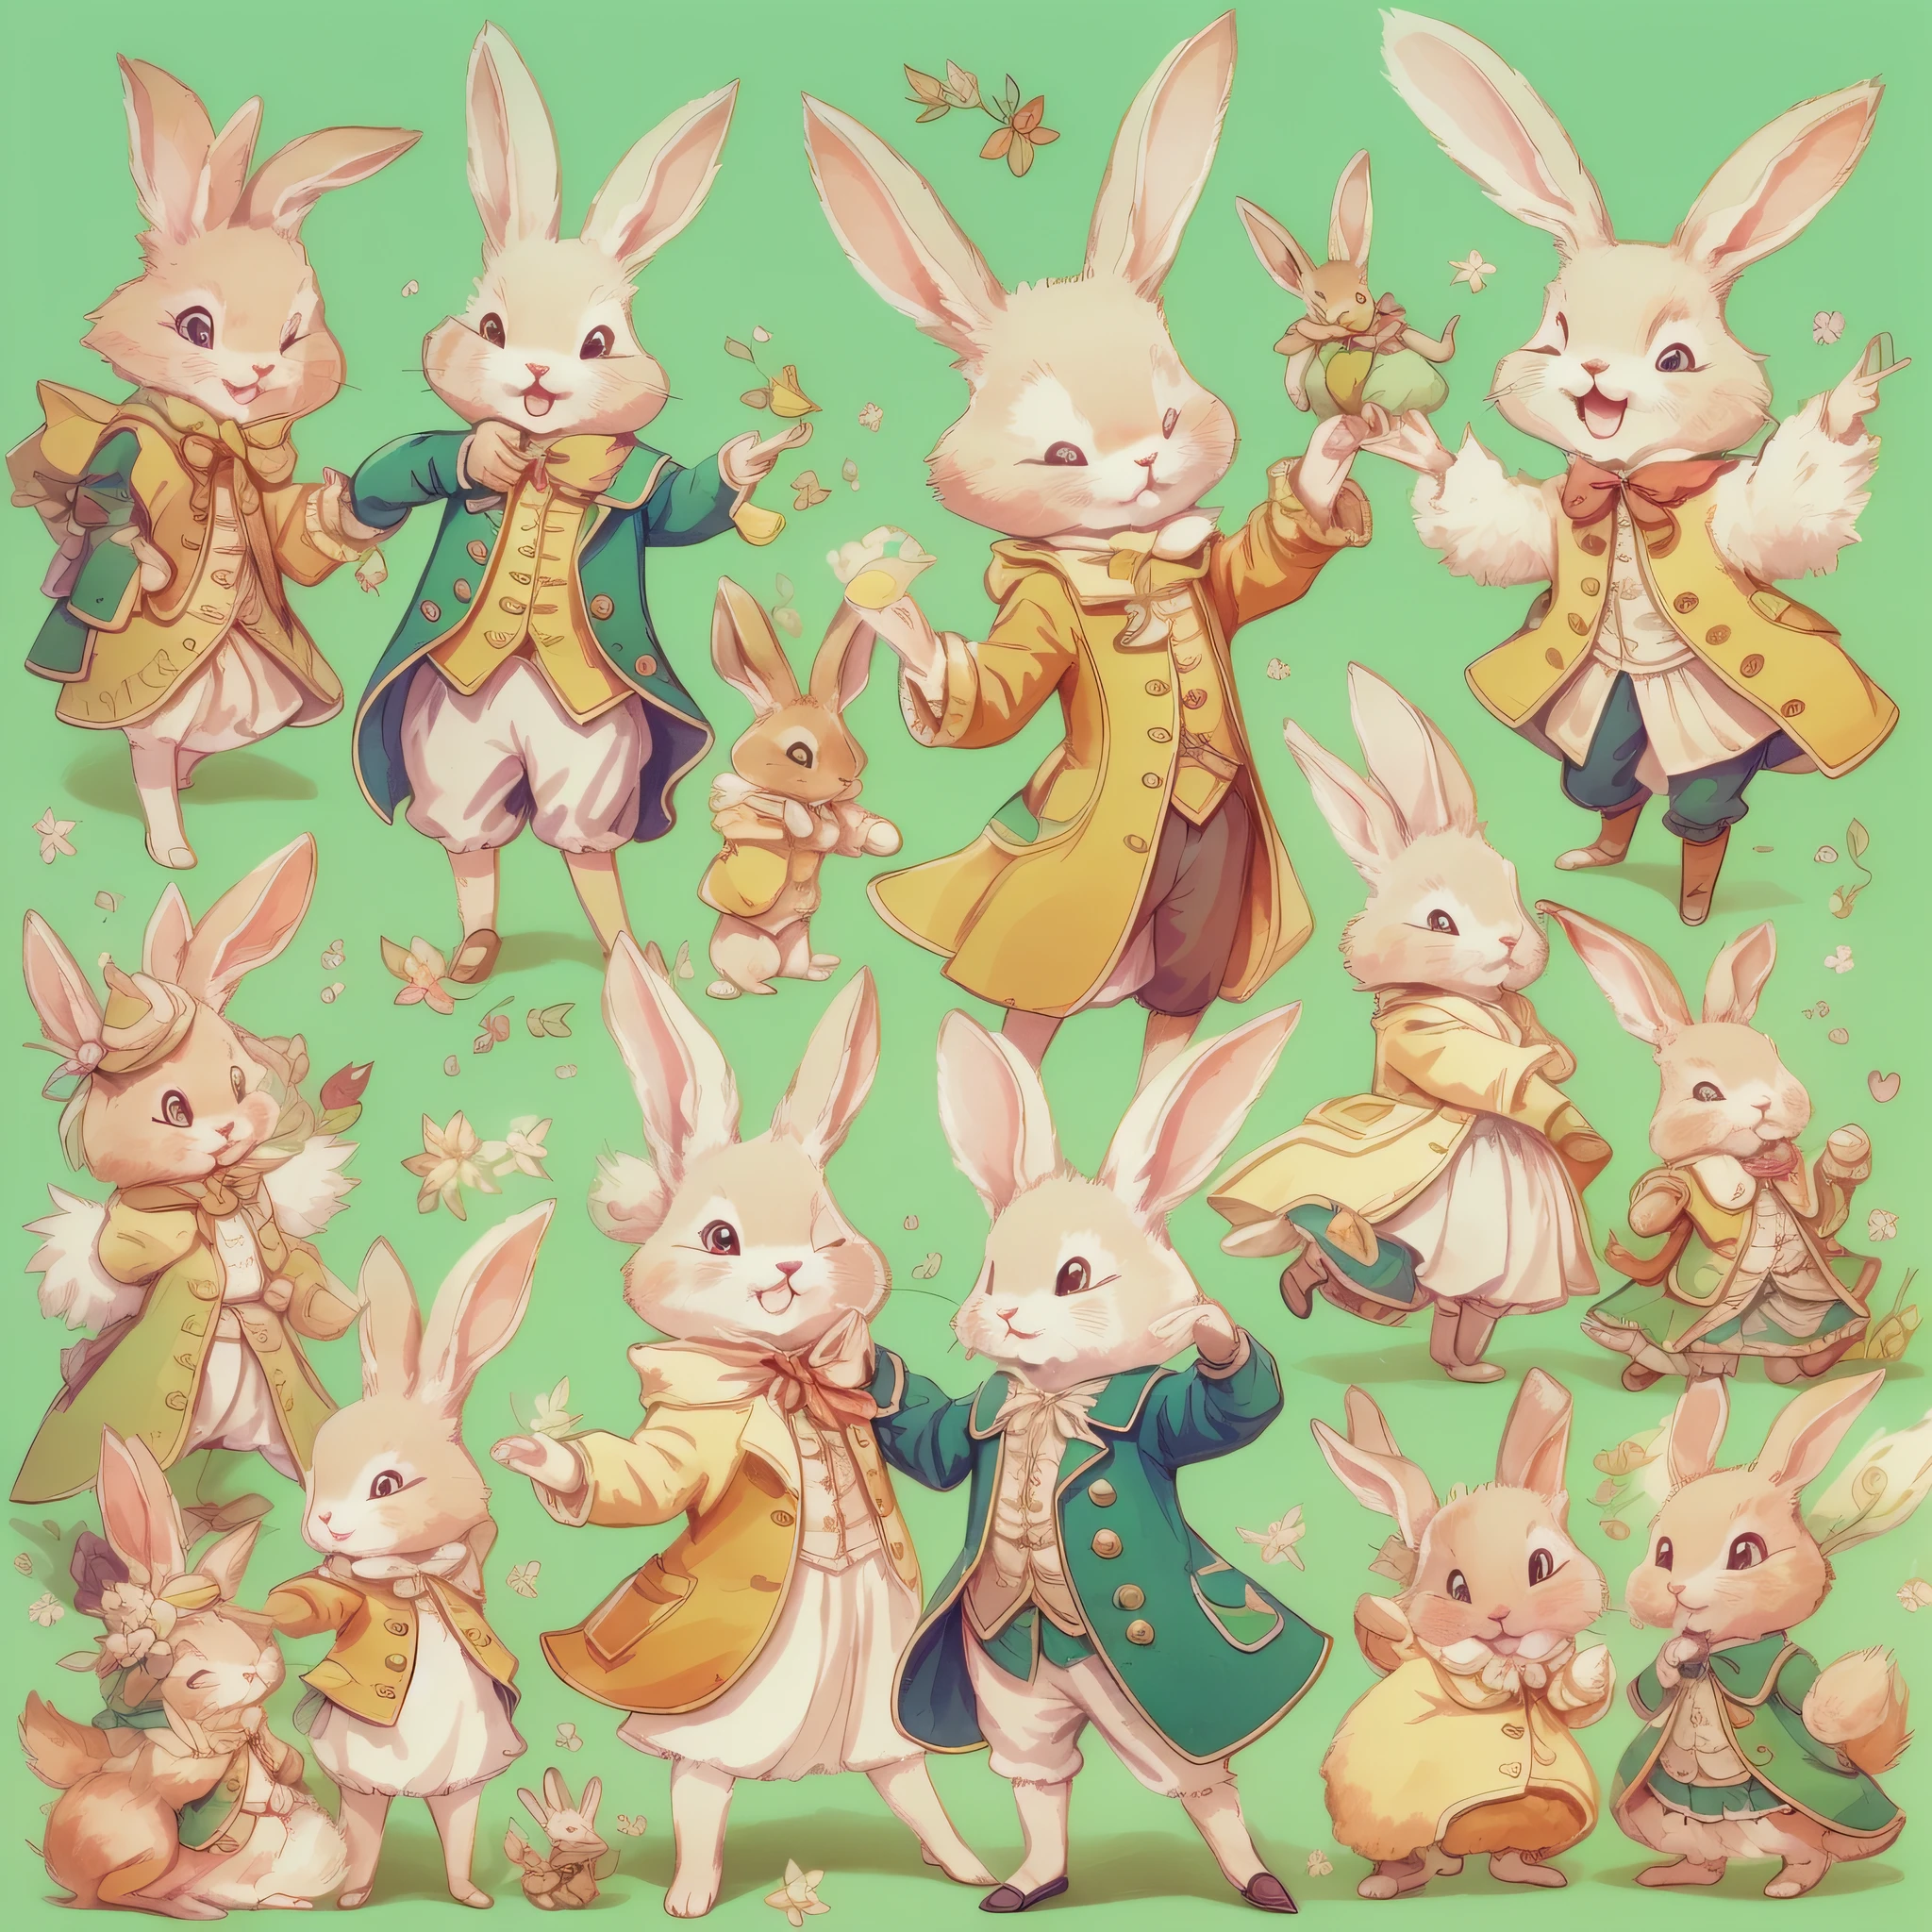 An ultra-high picture quality、Super delicate、Character design drawings、Full body like、Multiple dance poseultiple facial expressions、Anthropomorphic cute rabbit、Cute characters from fairy tales、Cute rabbit in coat、18th century French clothing、Colorful colors、